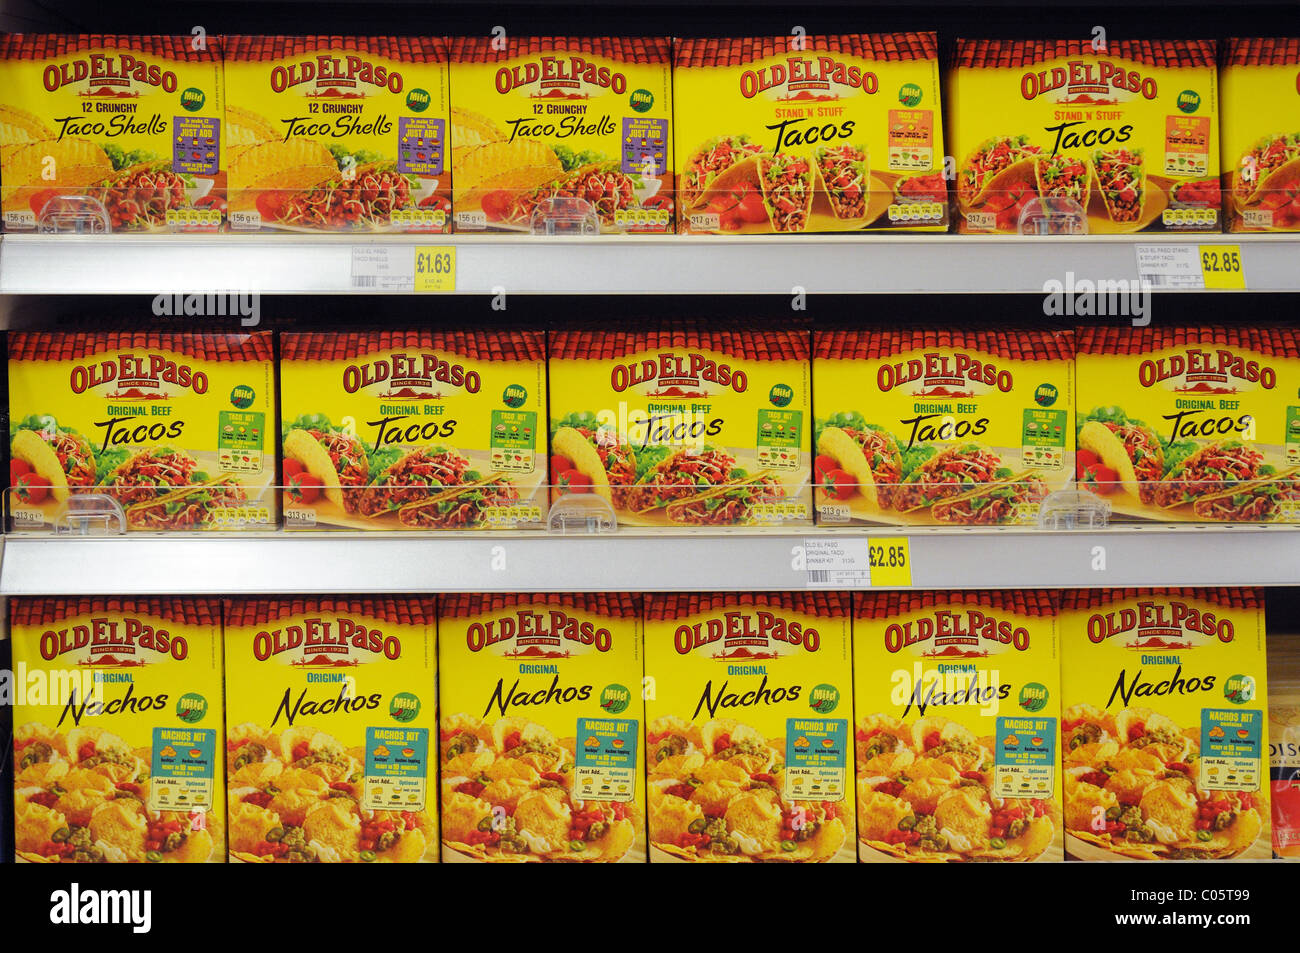 Boxes of Old El Paso Tacos on a shelf in a supermarket in England Stock Photo